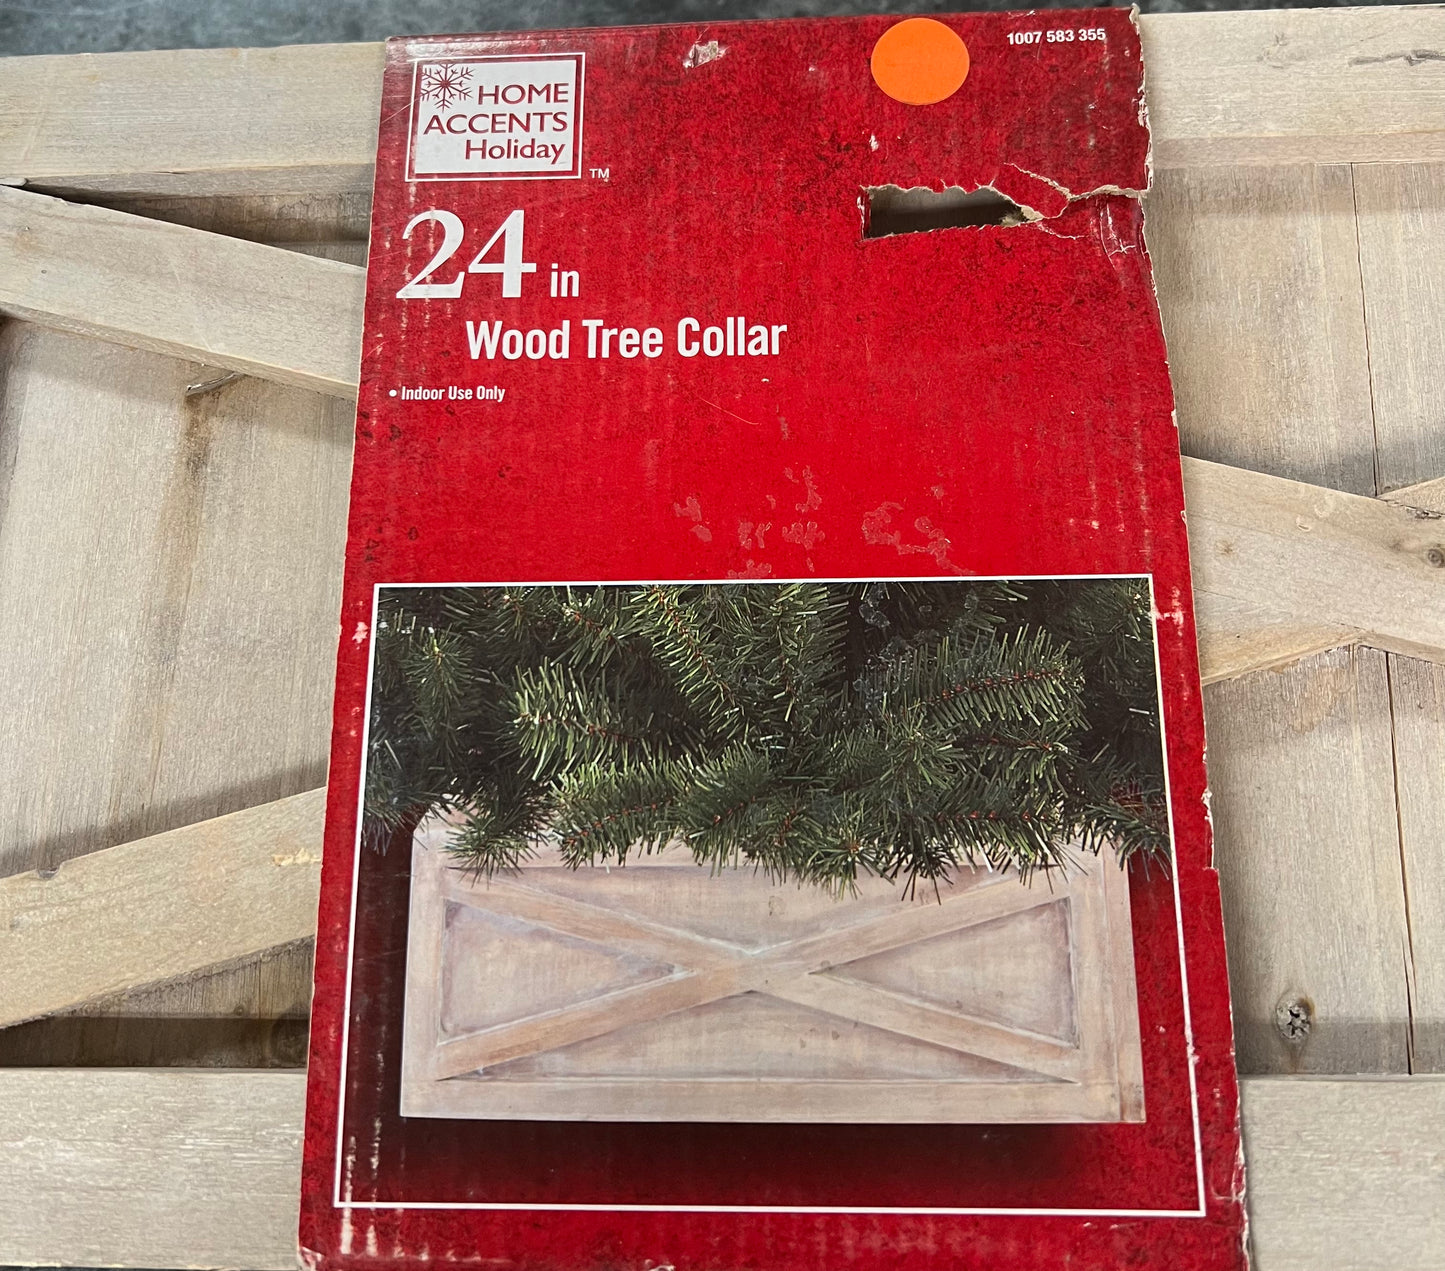 Home Accents Holiday 24in Wood Tree Collar